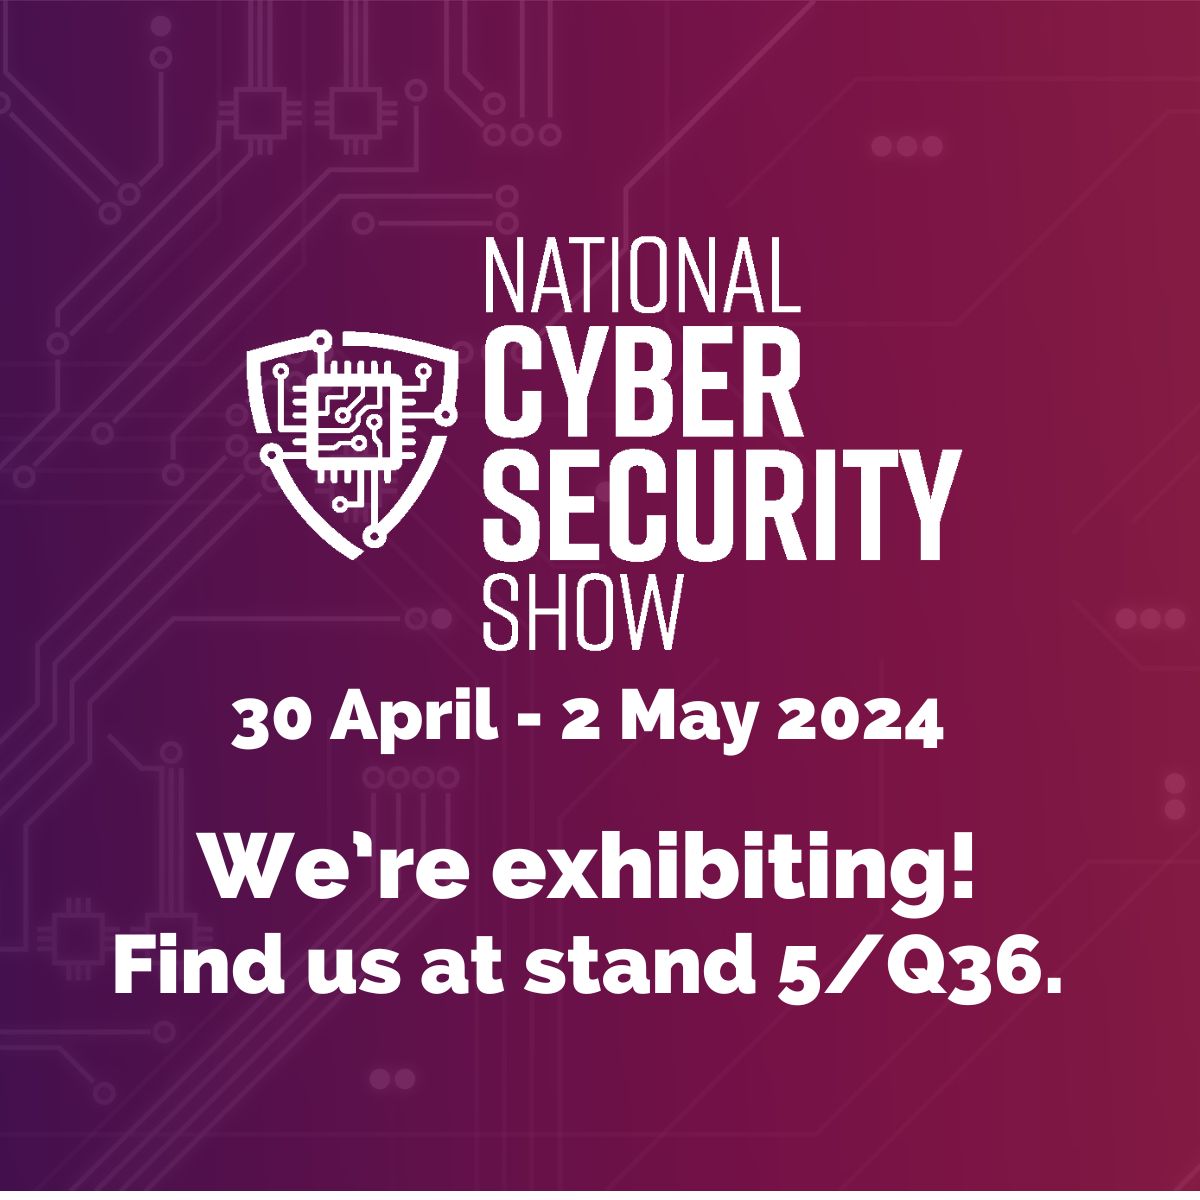 We're very proud to announce that we'll be exhibiting at the National Cyber Security show at the NEC at the end of this month. 💥 You can sign up for tickets here: rfg.circdata.com/publish/NCSS20… And make sure to pop along and see us - you can find us at stand 5/Q36!